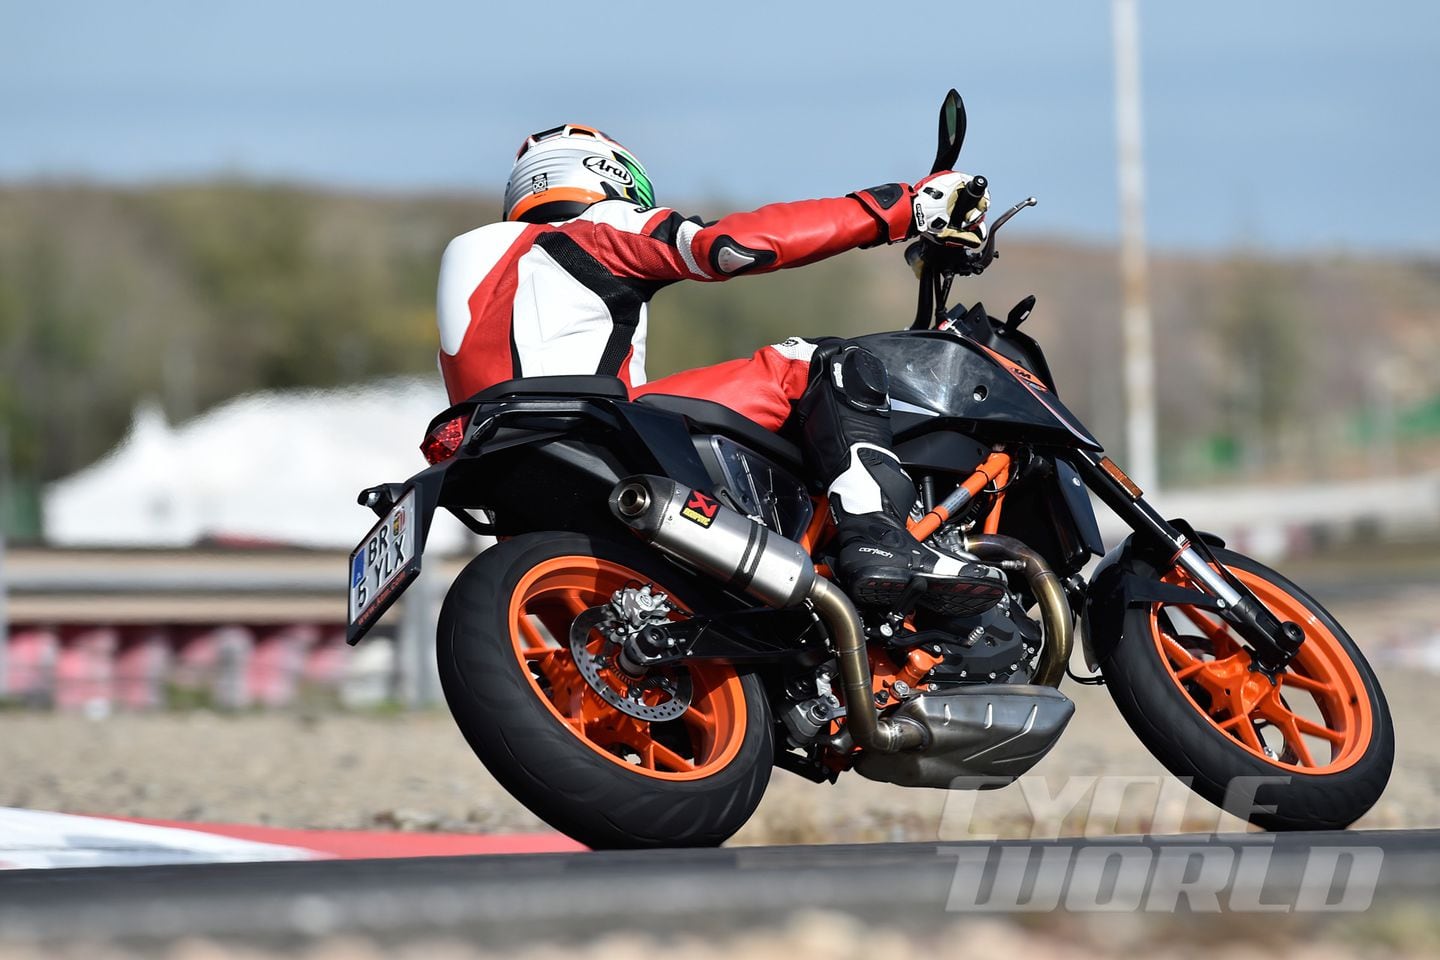 2016 KTM 690 Duke Naked Motorcycle FIRST RIDE Review, Photos | Cycle World